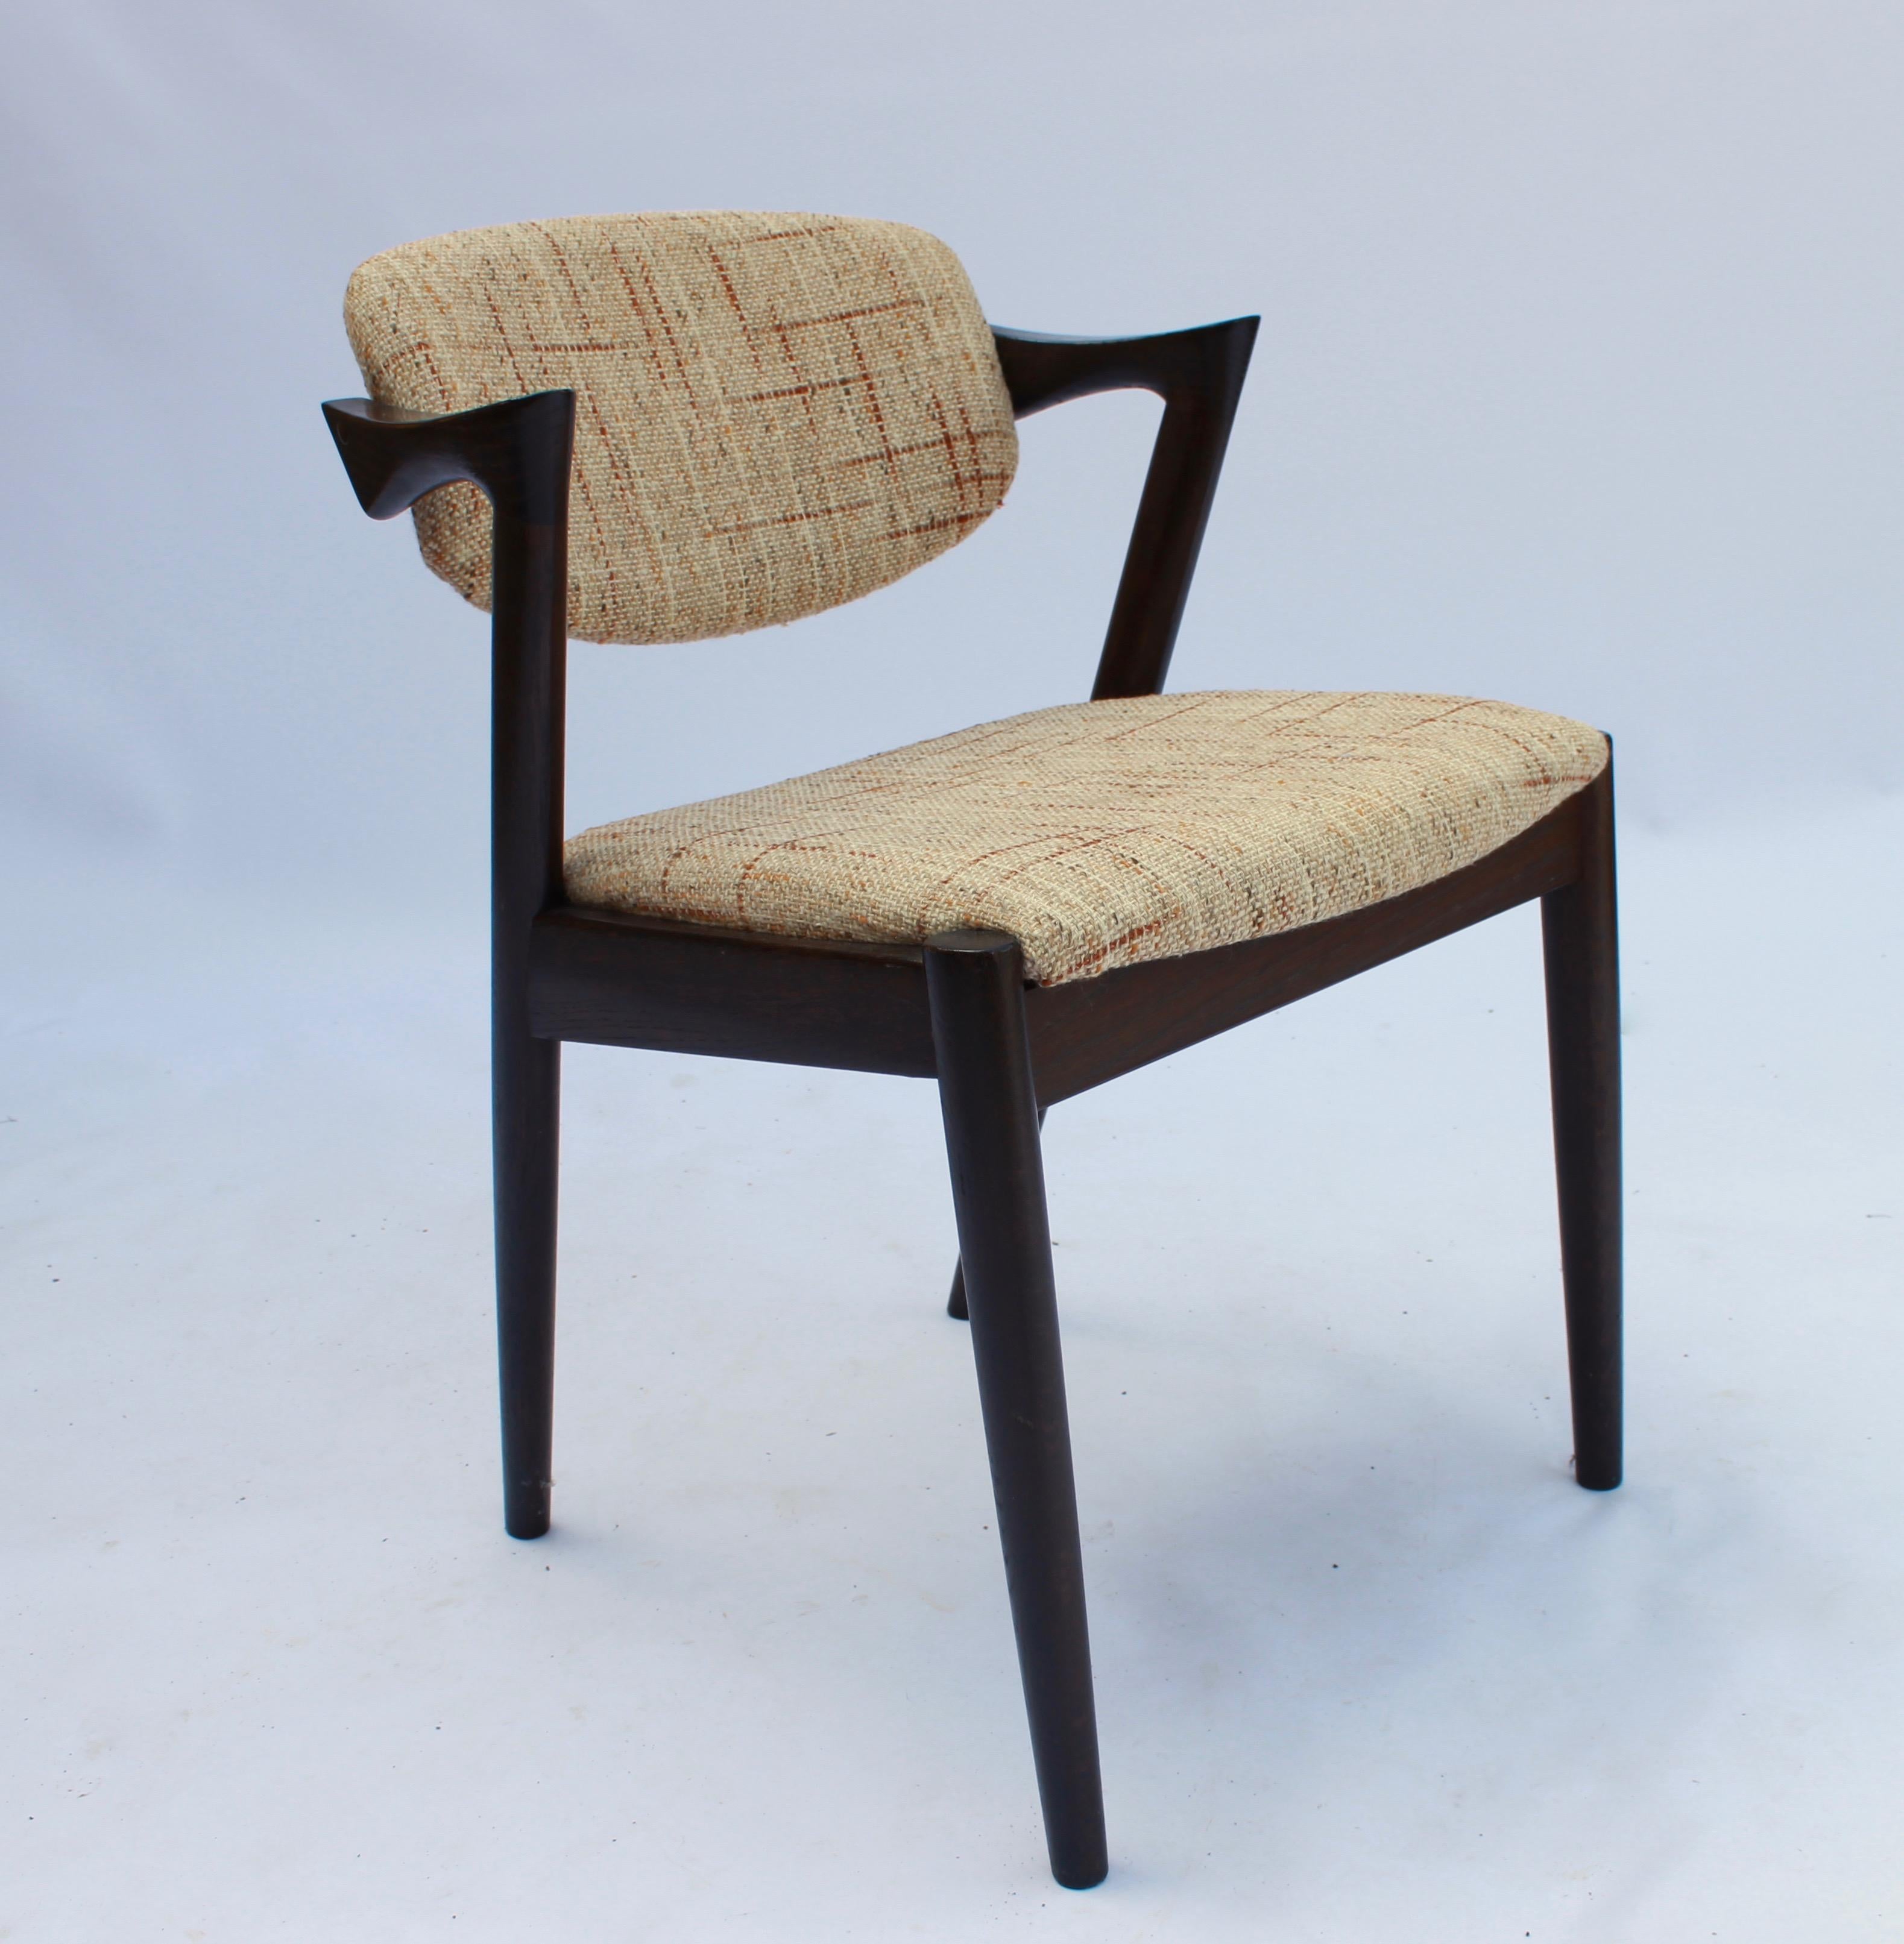 A set of 6 dining chairs, model 42, designed by Kai Kristiansen and manufactured by Schou Andersen in the 1960s. The chairs are of dark oak and upholstered in light wool fabric.